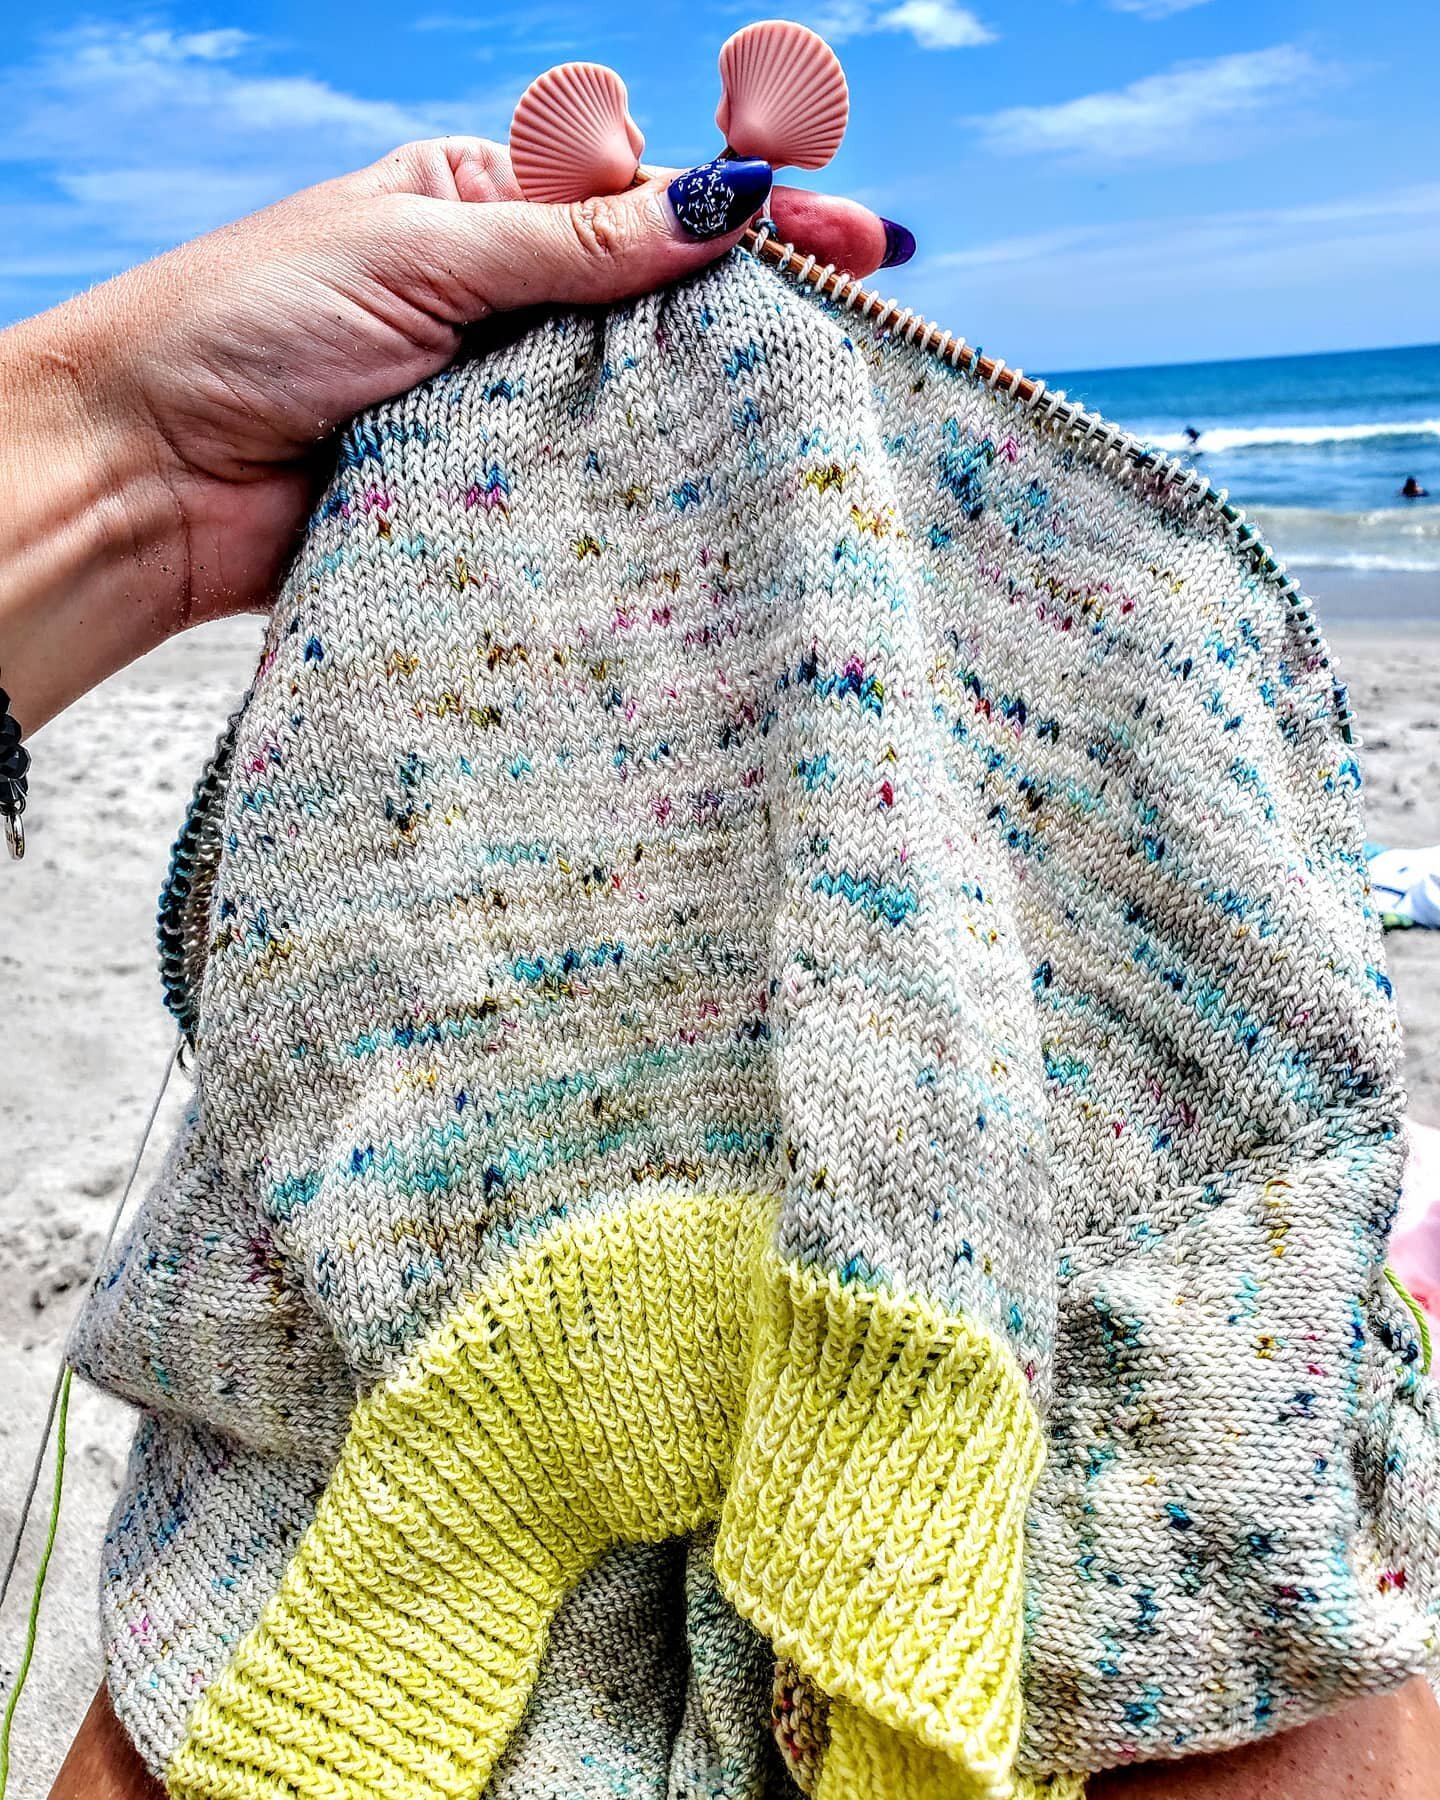 🌊🐚 Oh Shell Yea!🐚🌊
.
It's Monday, Y'all!  Got a crazy busy week ahead but I'm excited to try and tackle it all.  First up is wrapping up my test of the #twistedteashirt by @thelittlewolfknits .  This has been my happy WIP to work on while I've be